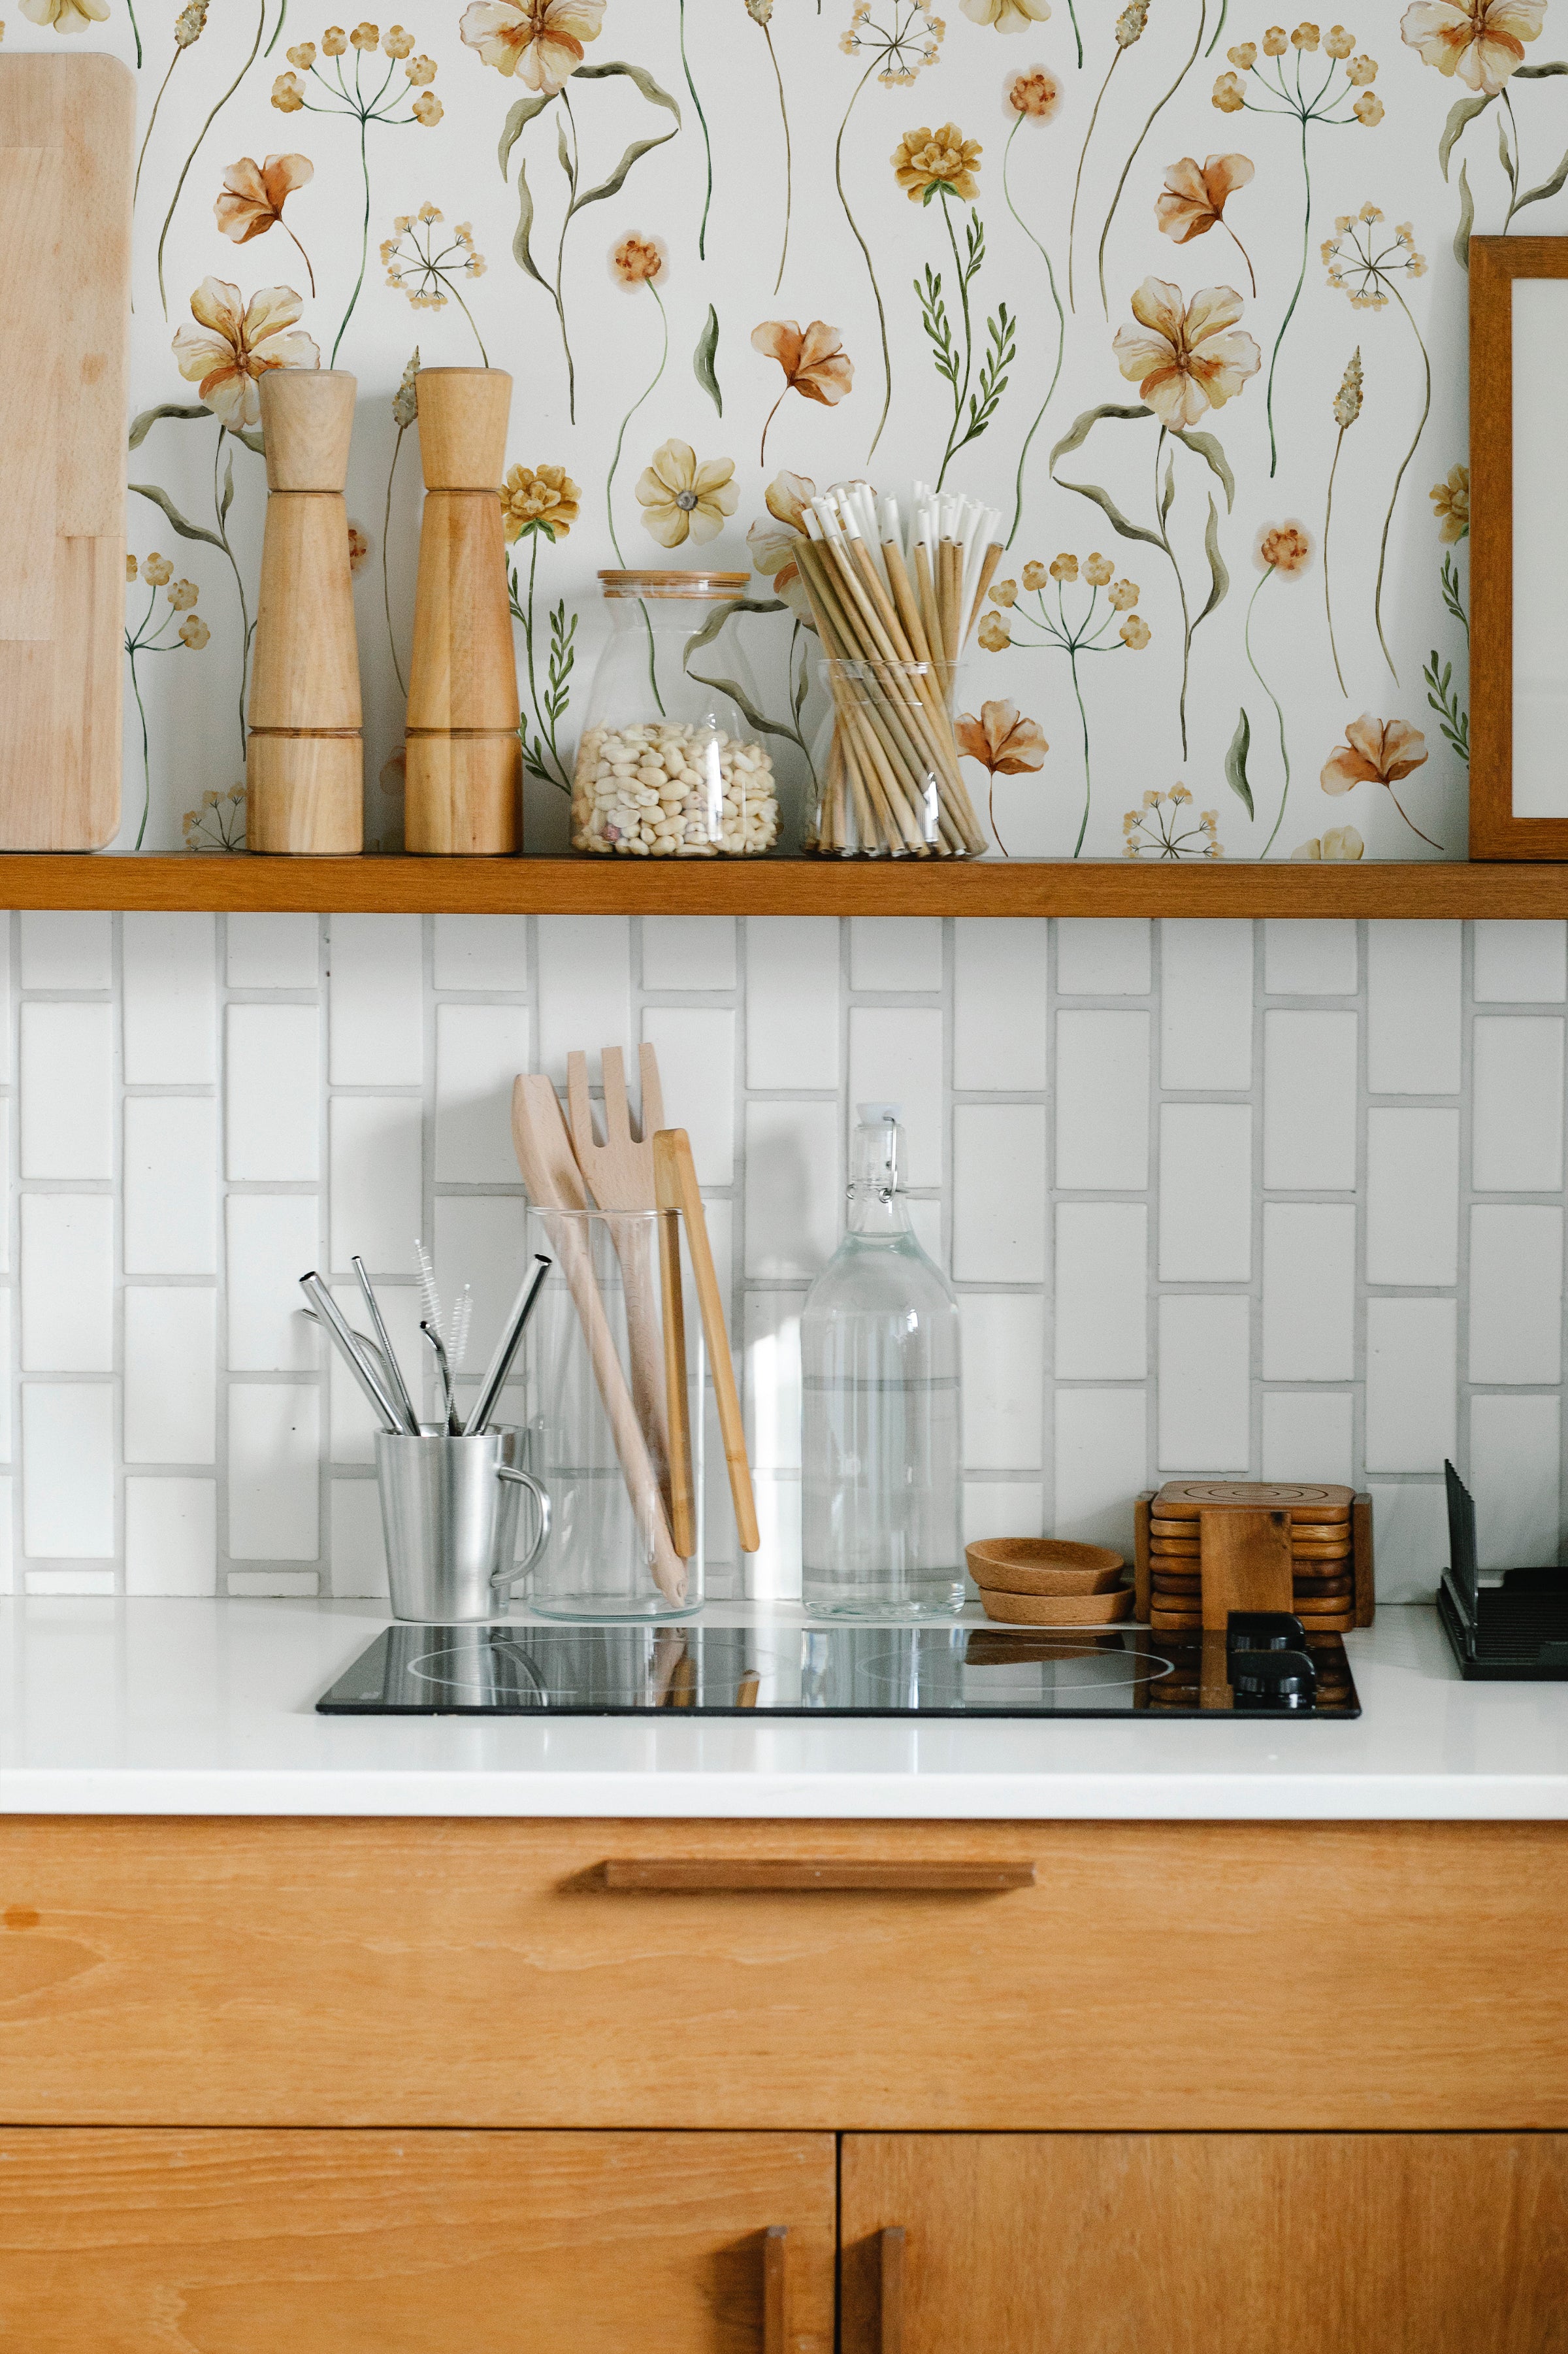 A modern kitchen enhanced by Warm Glow Floral Wallpaper, featuring a subtle and elegant floral pattern. Wooden kitchen accessories and white tiles complement the wallpaper's soft, natural color palette, creating a harmonious and inviting cooking space.